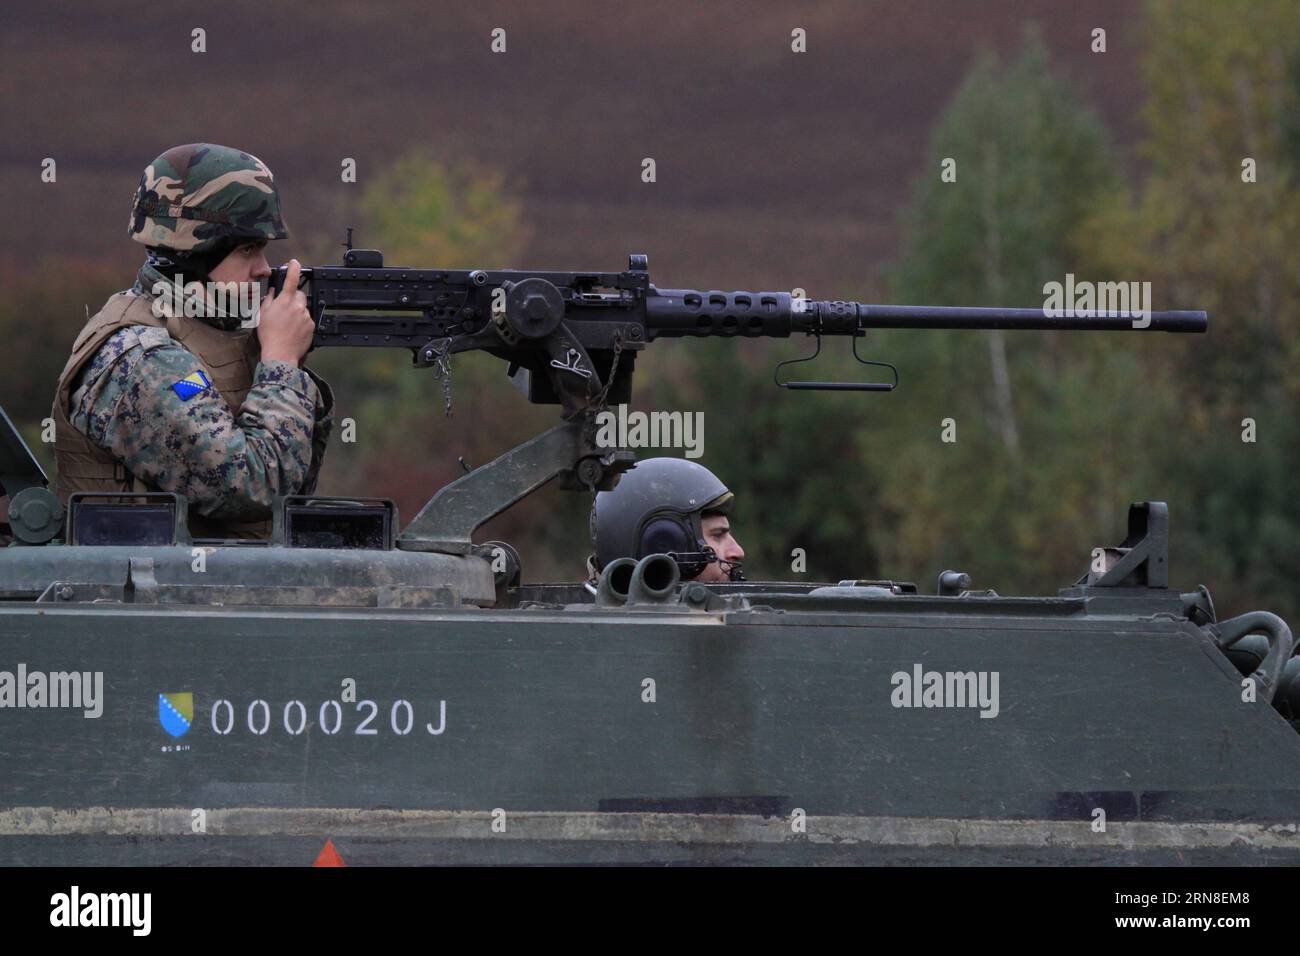 (151020) -- BANJA LUKA, Oct. 20, 2015 -- Bosnian soldiers attend an exercise together with European Union Forces (EUFOR) in Manjaca military base, 20km from Banja Luka, Bosnia-Herzegovina, on Oct. 20, 2015. EUFOR s military exercise Quick Response 2015 will be held until Oct. 22. ) BOSNIA AND HERZEGOVINA-BANJA LUKA-EUFOR-QUICK RESPONSE HarisxMemija PUBLICATIONxNOTxINxCHN   Banja Luka OCT 20 2015 Bosnian Soldiers attend to EXERCISE Together With European Union Forces EUFOR in  Military Base 20Km from Banja Luka Bosnia Herzegovina ON OCT 20 2015 EUFOR S Military EXERCISE Quick Response 2015 will Stock Photo